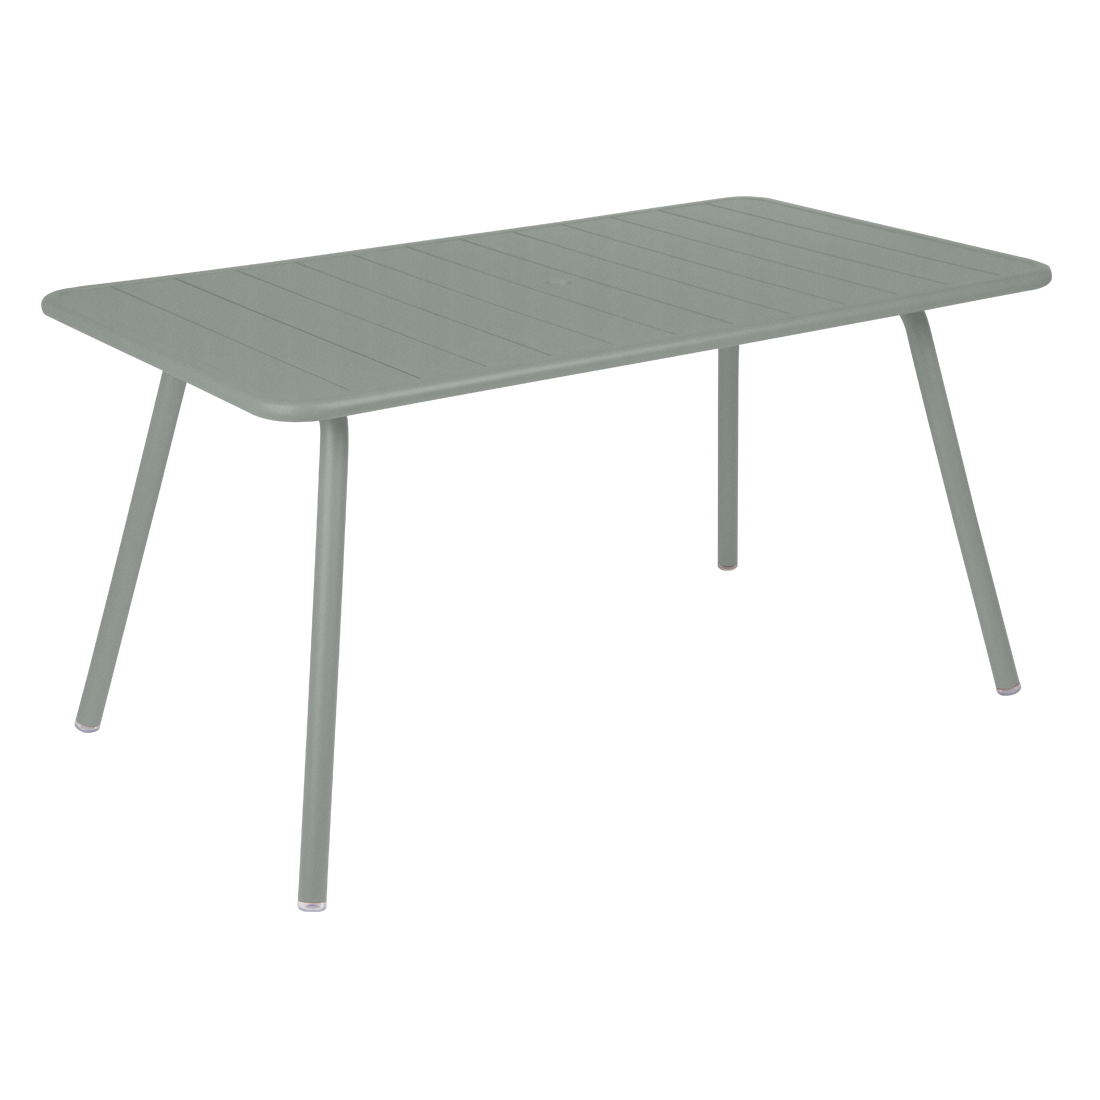 LUXEMBOURG TABLE 143 X 80 CM